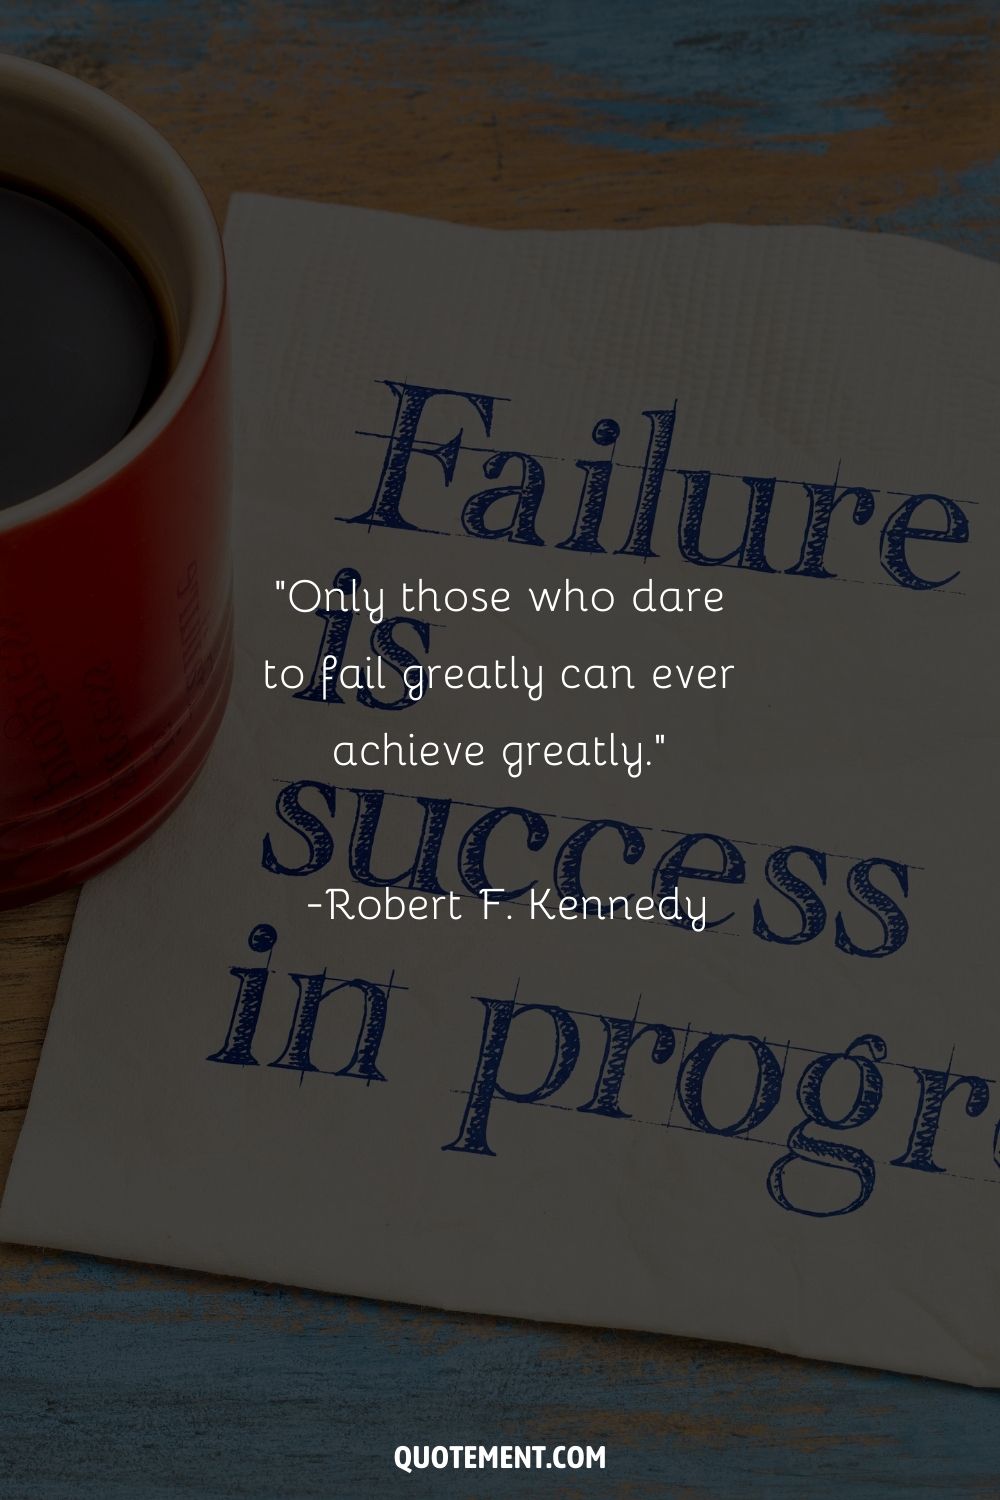 “Only those who dare to fail greatly can ever achieve greatly.” ― Robert F. Kennedy